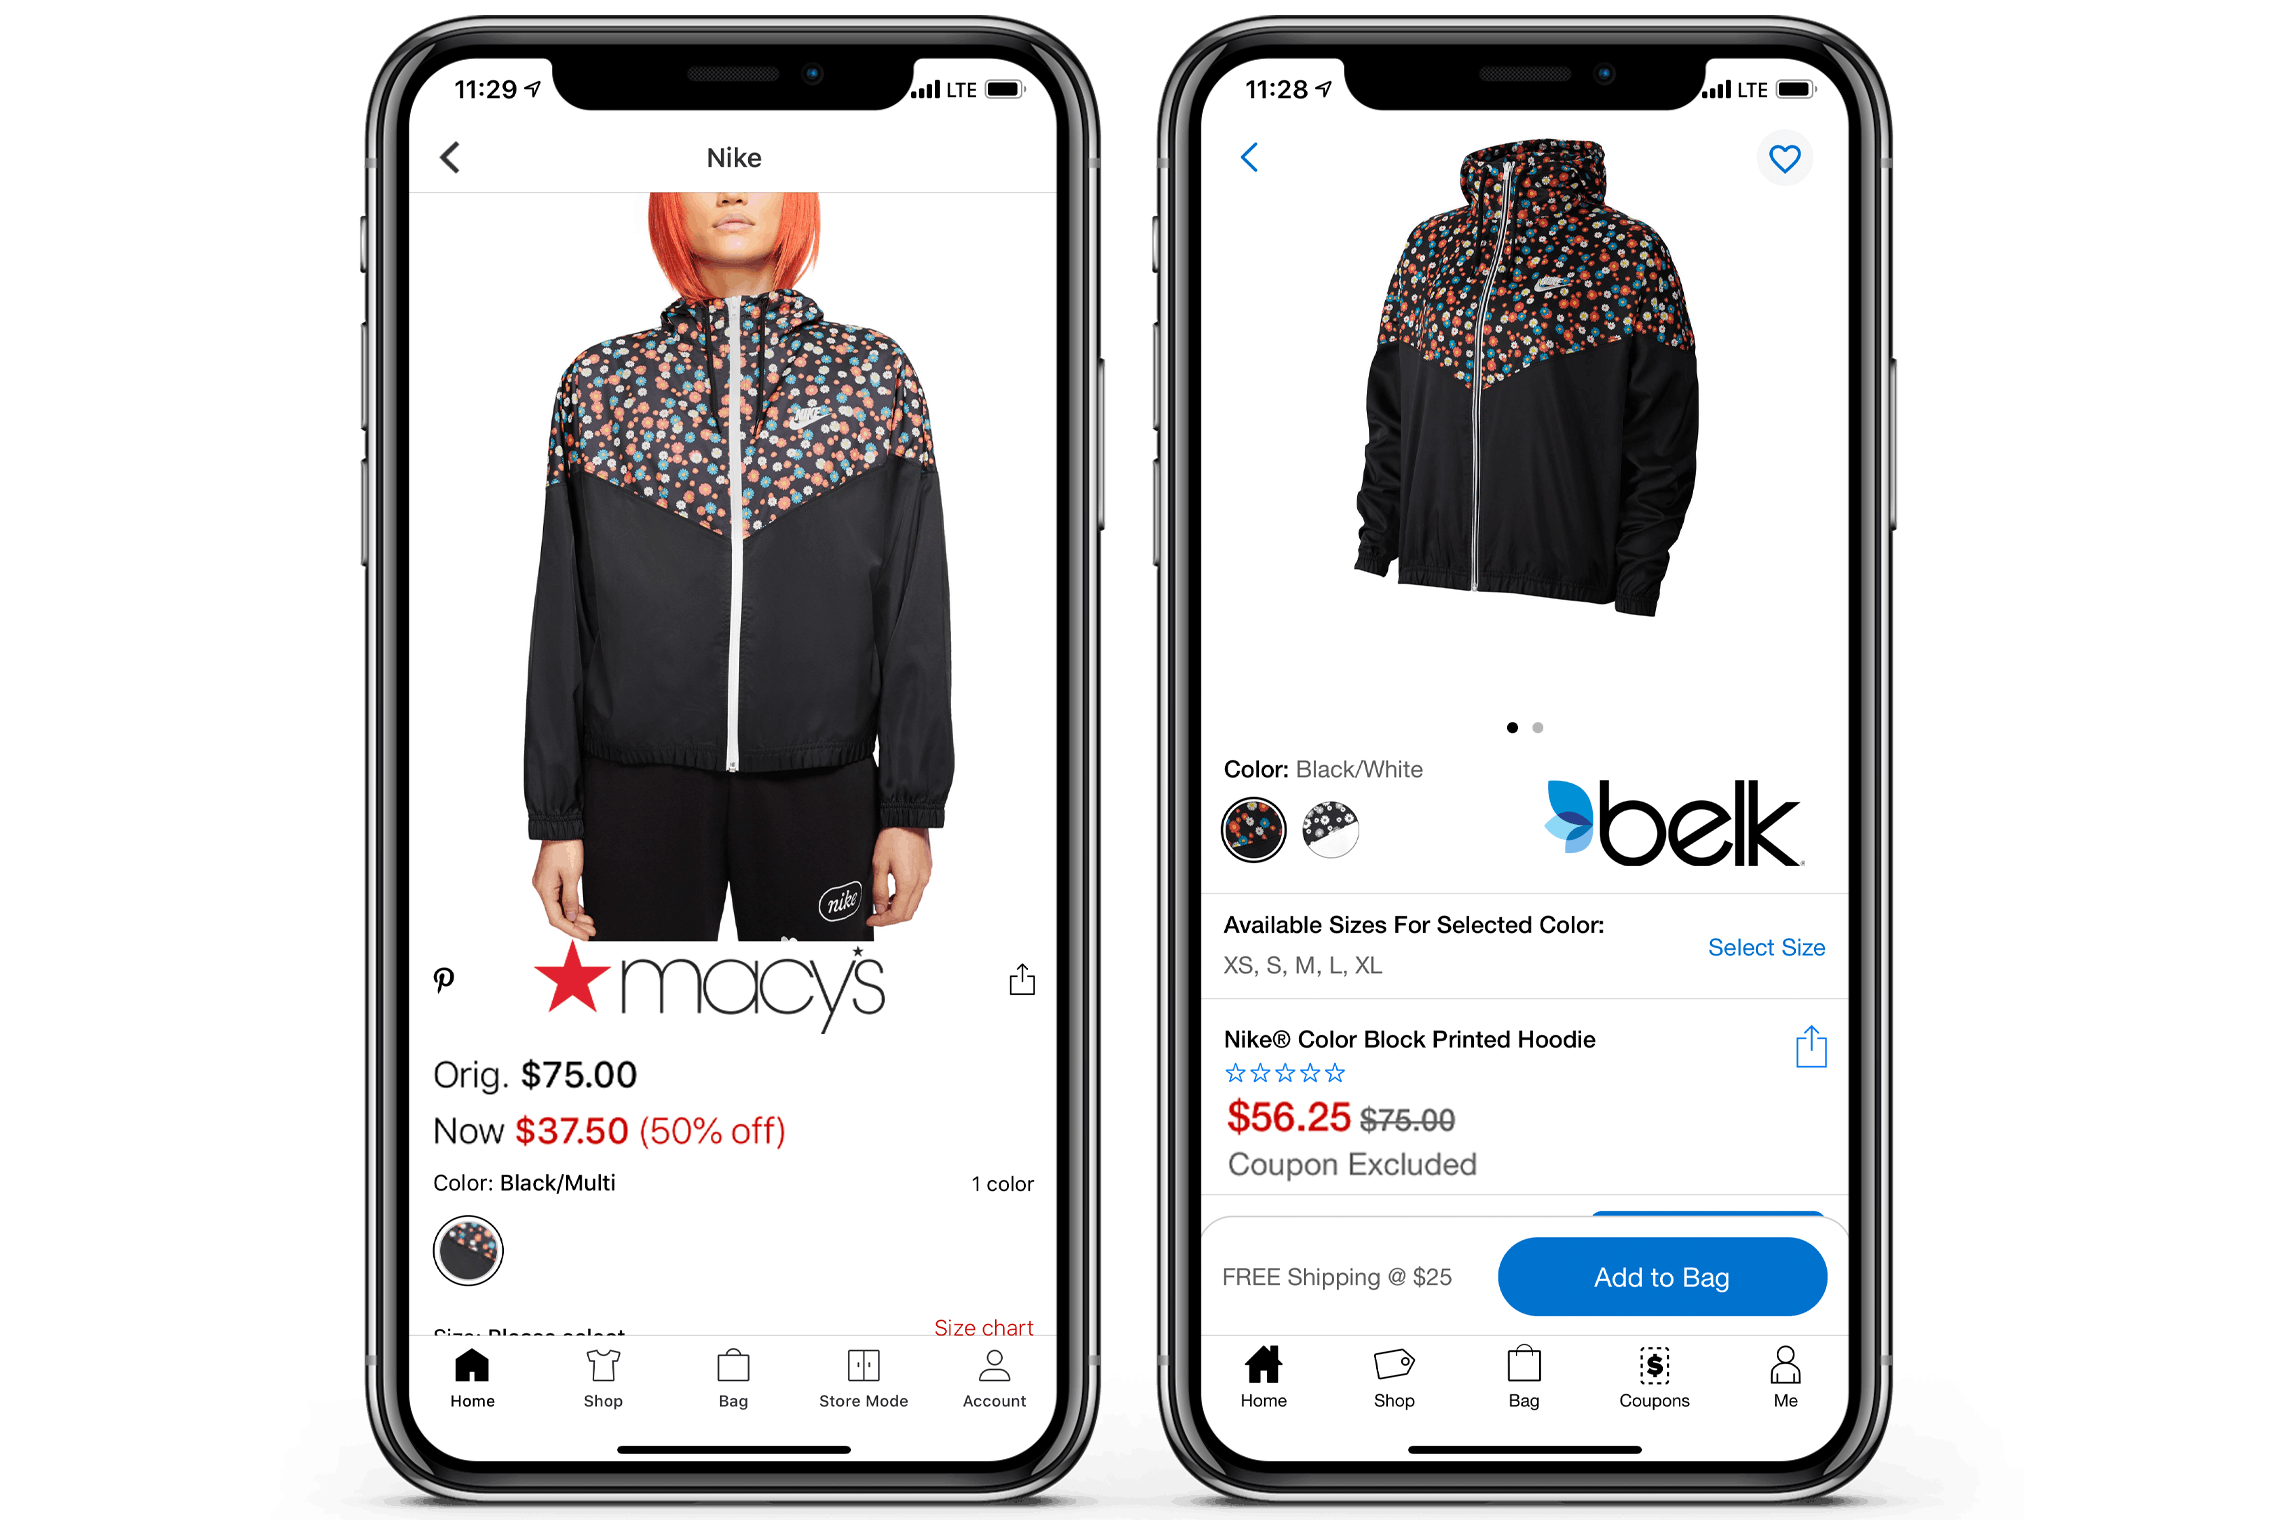 Side by side price comparison of the same product at Belk and Macys